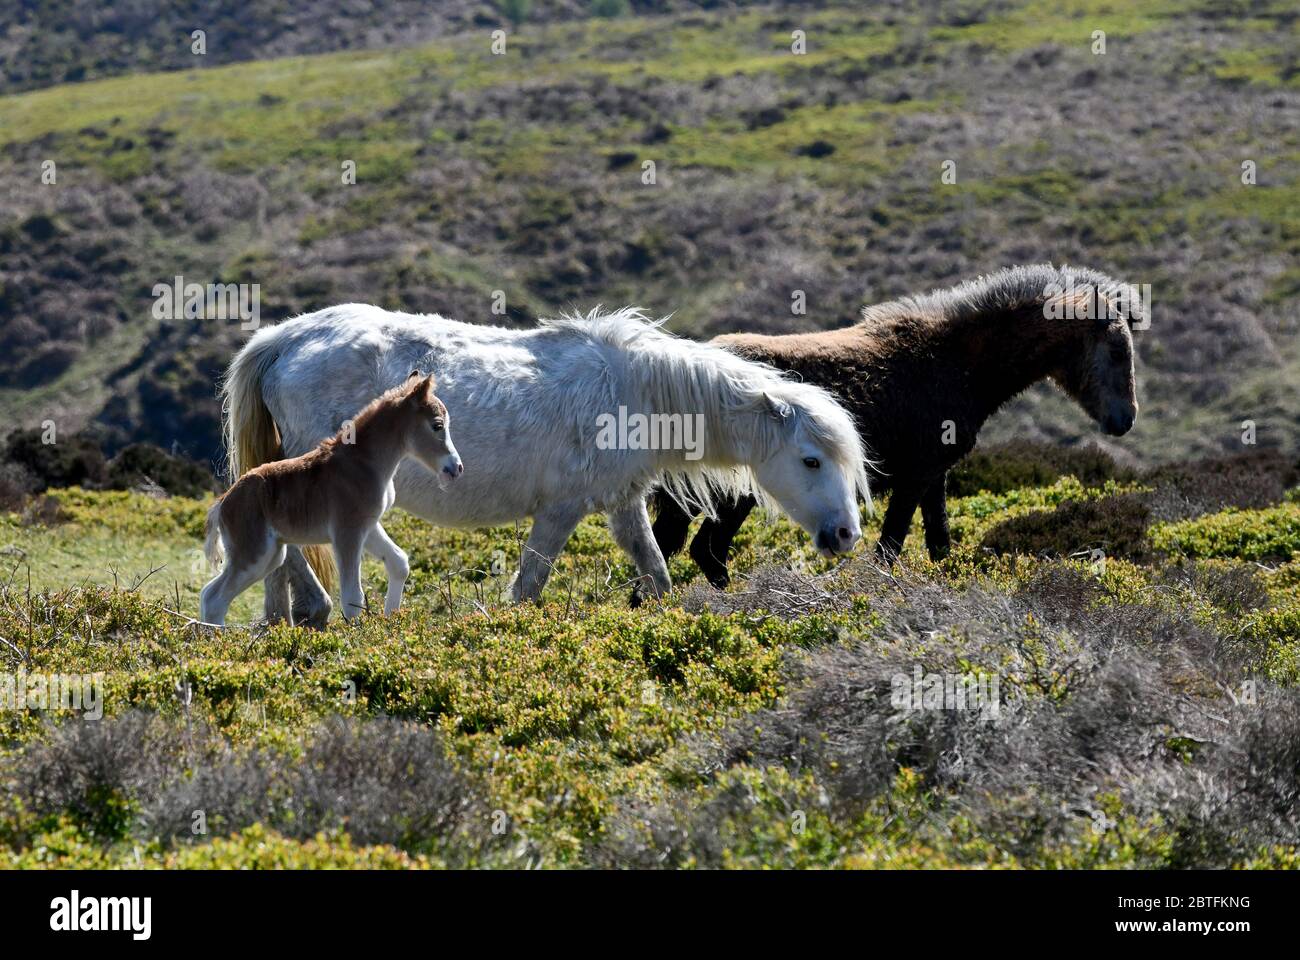 The Long Mynd, Church Stretton, Shropshire, Uk  May 25th 2020. Out for a bank holiday stroll with mum and dad, this 3 day old foal was one the wild ponies enjoyng the holiday weather on the Shropshire hills. Stock Photo